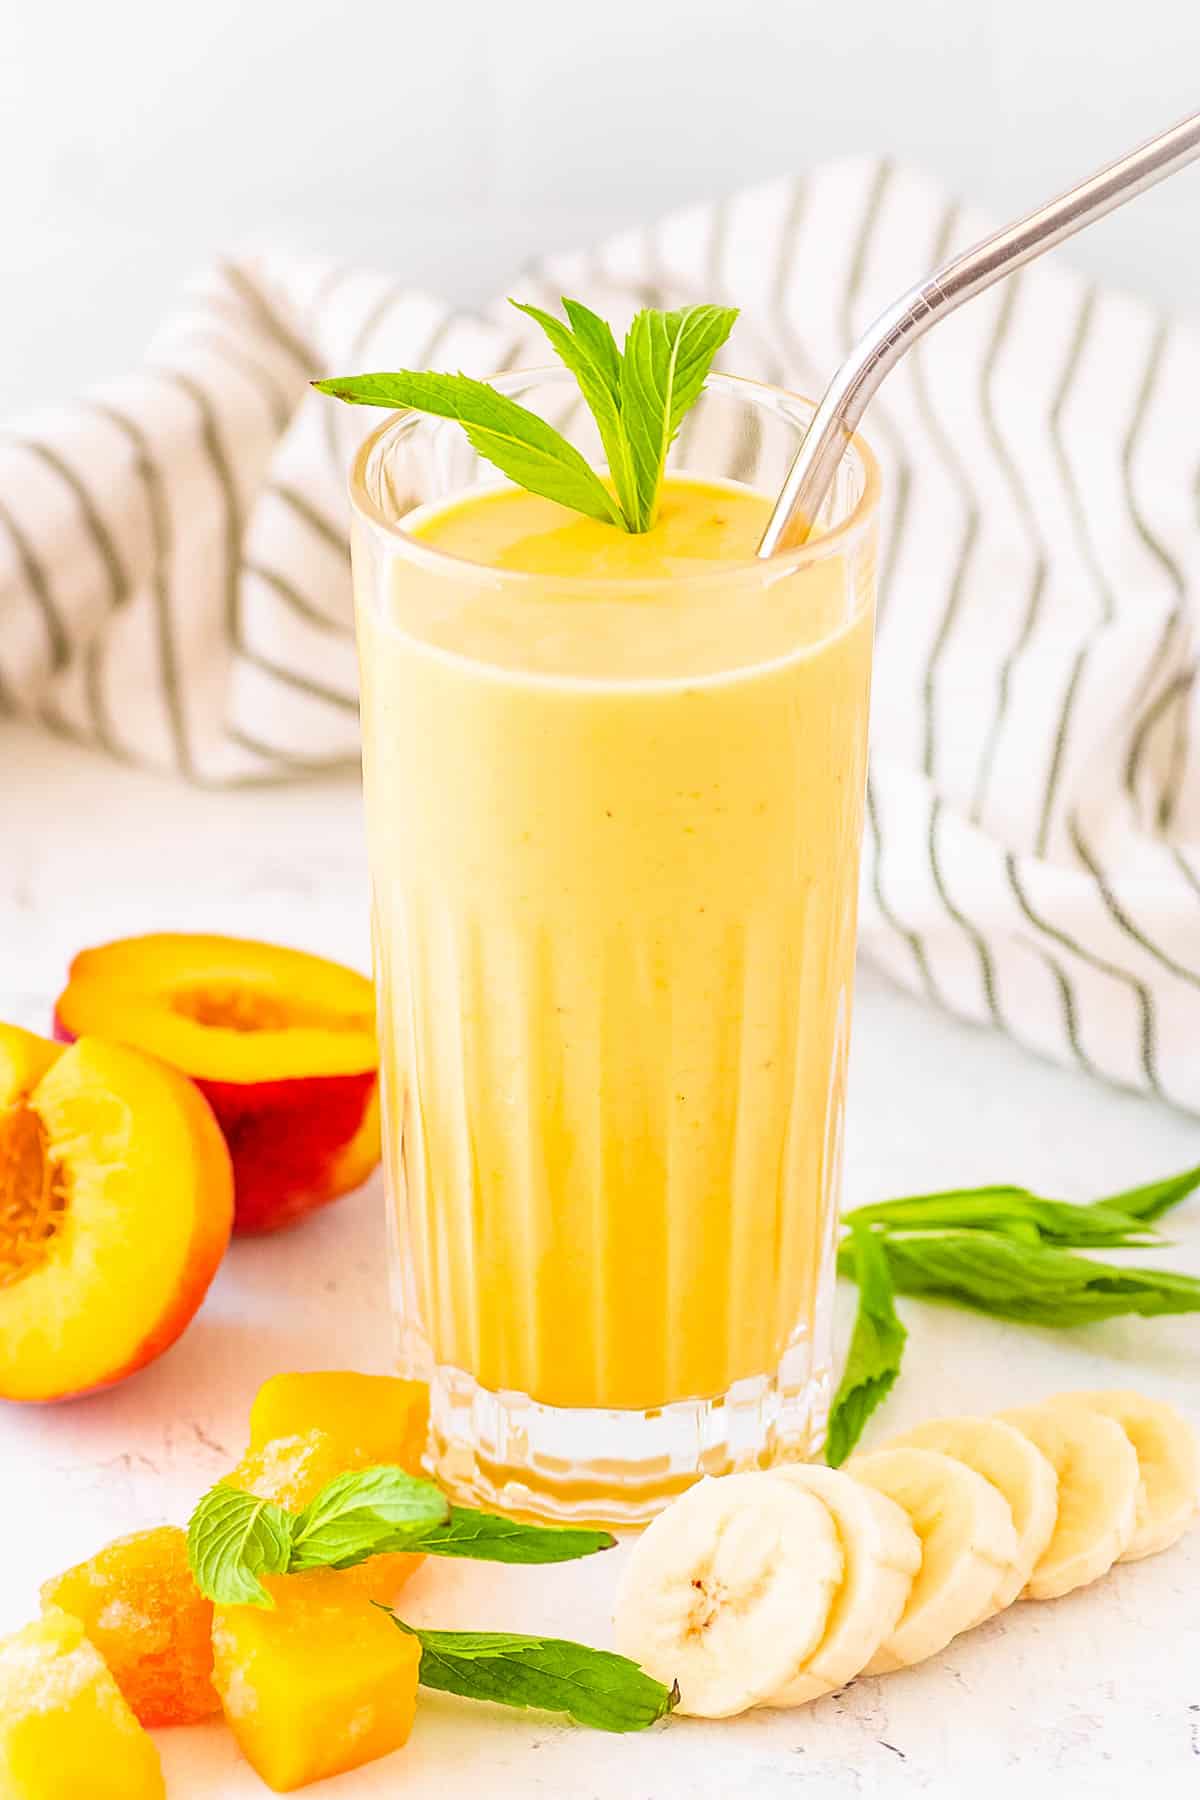 Peach banana smoothie served in a gl، with a straw and mint leaves as a garnish.